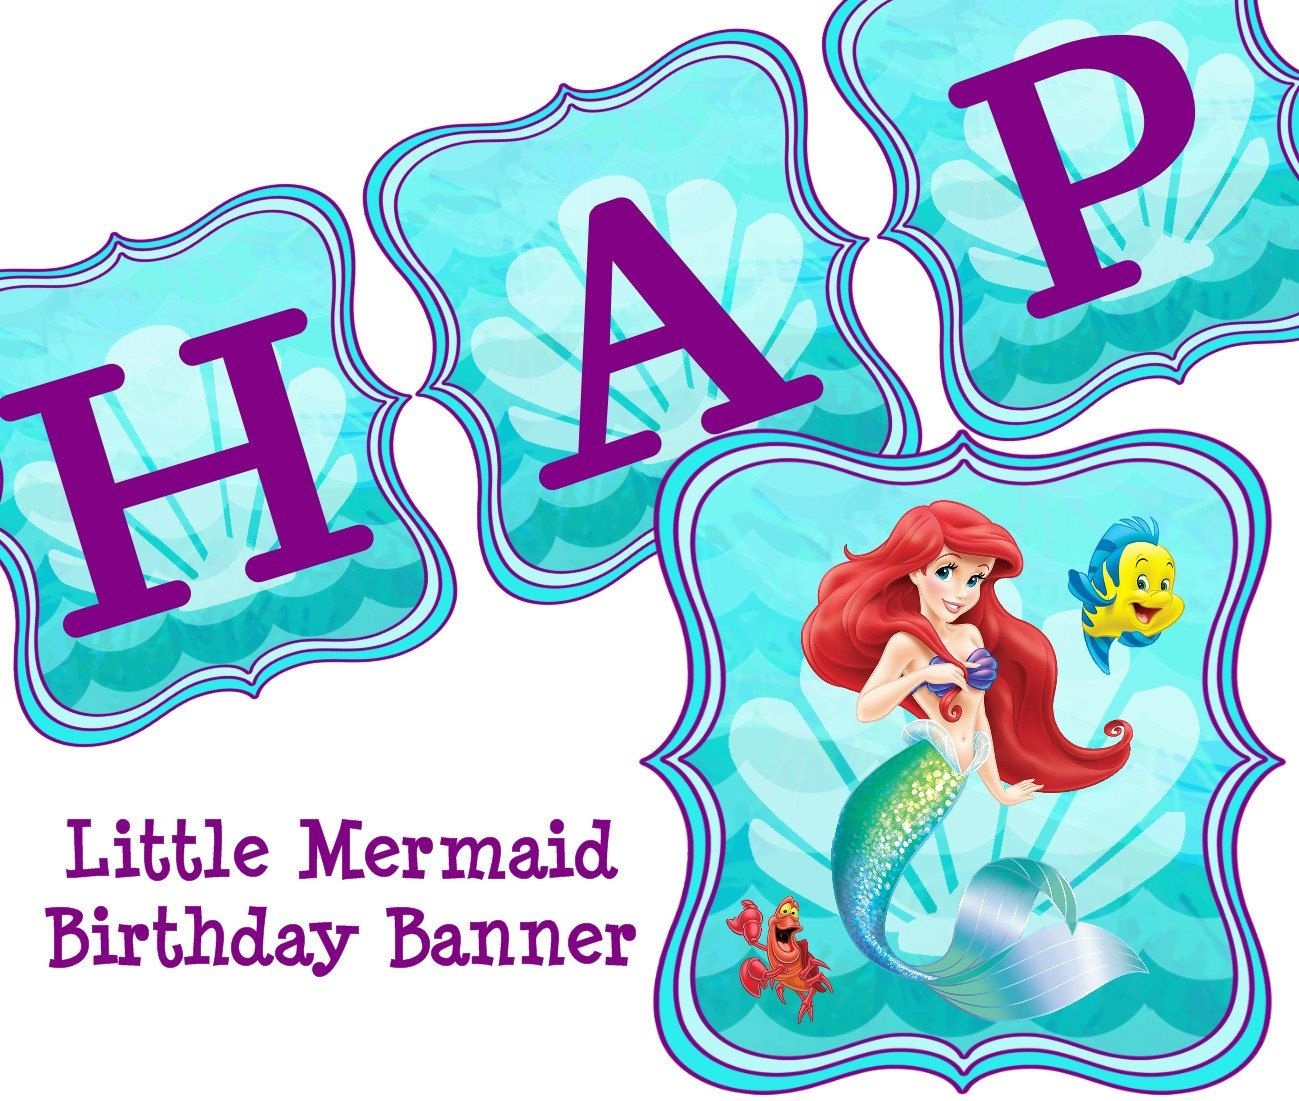 Little Mermaid Free Party Printables - Buscar Con Google | Lil - Free Printable Little Mermaid Birthday Banner